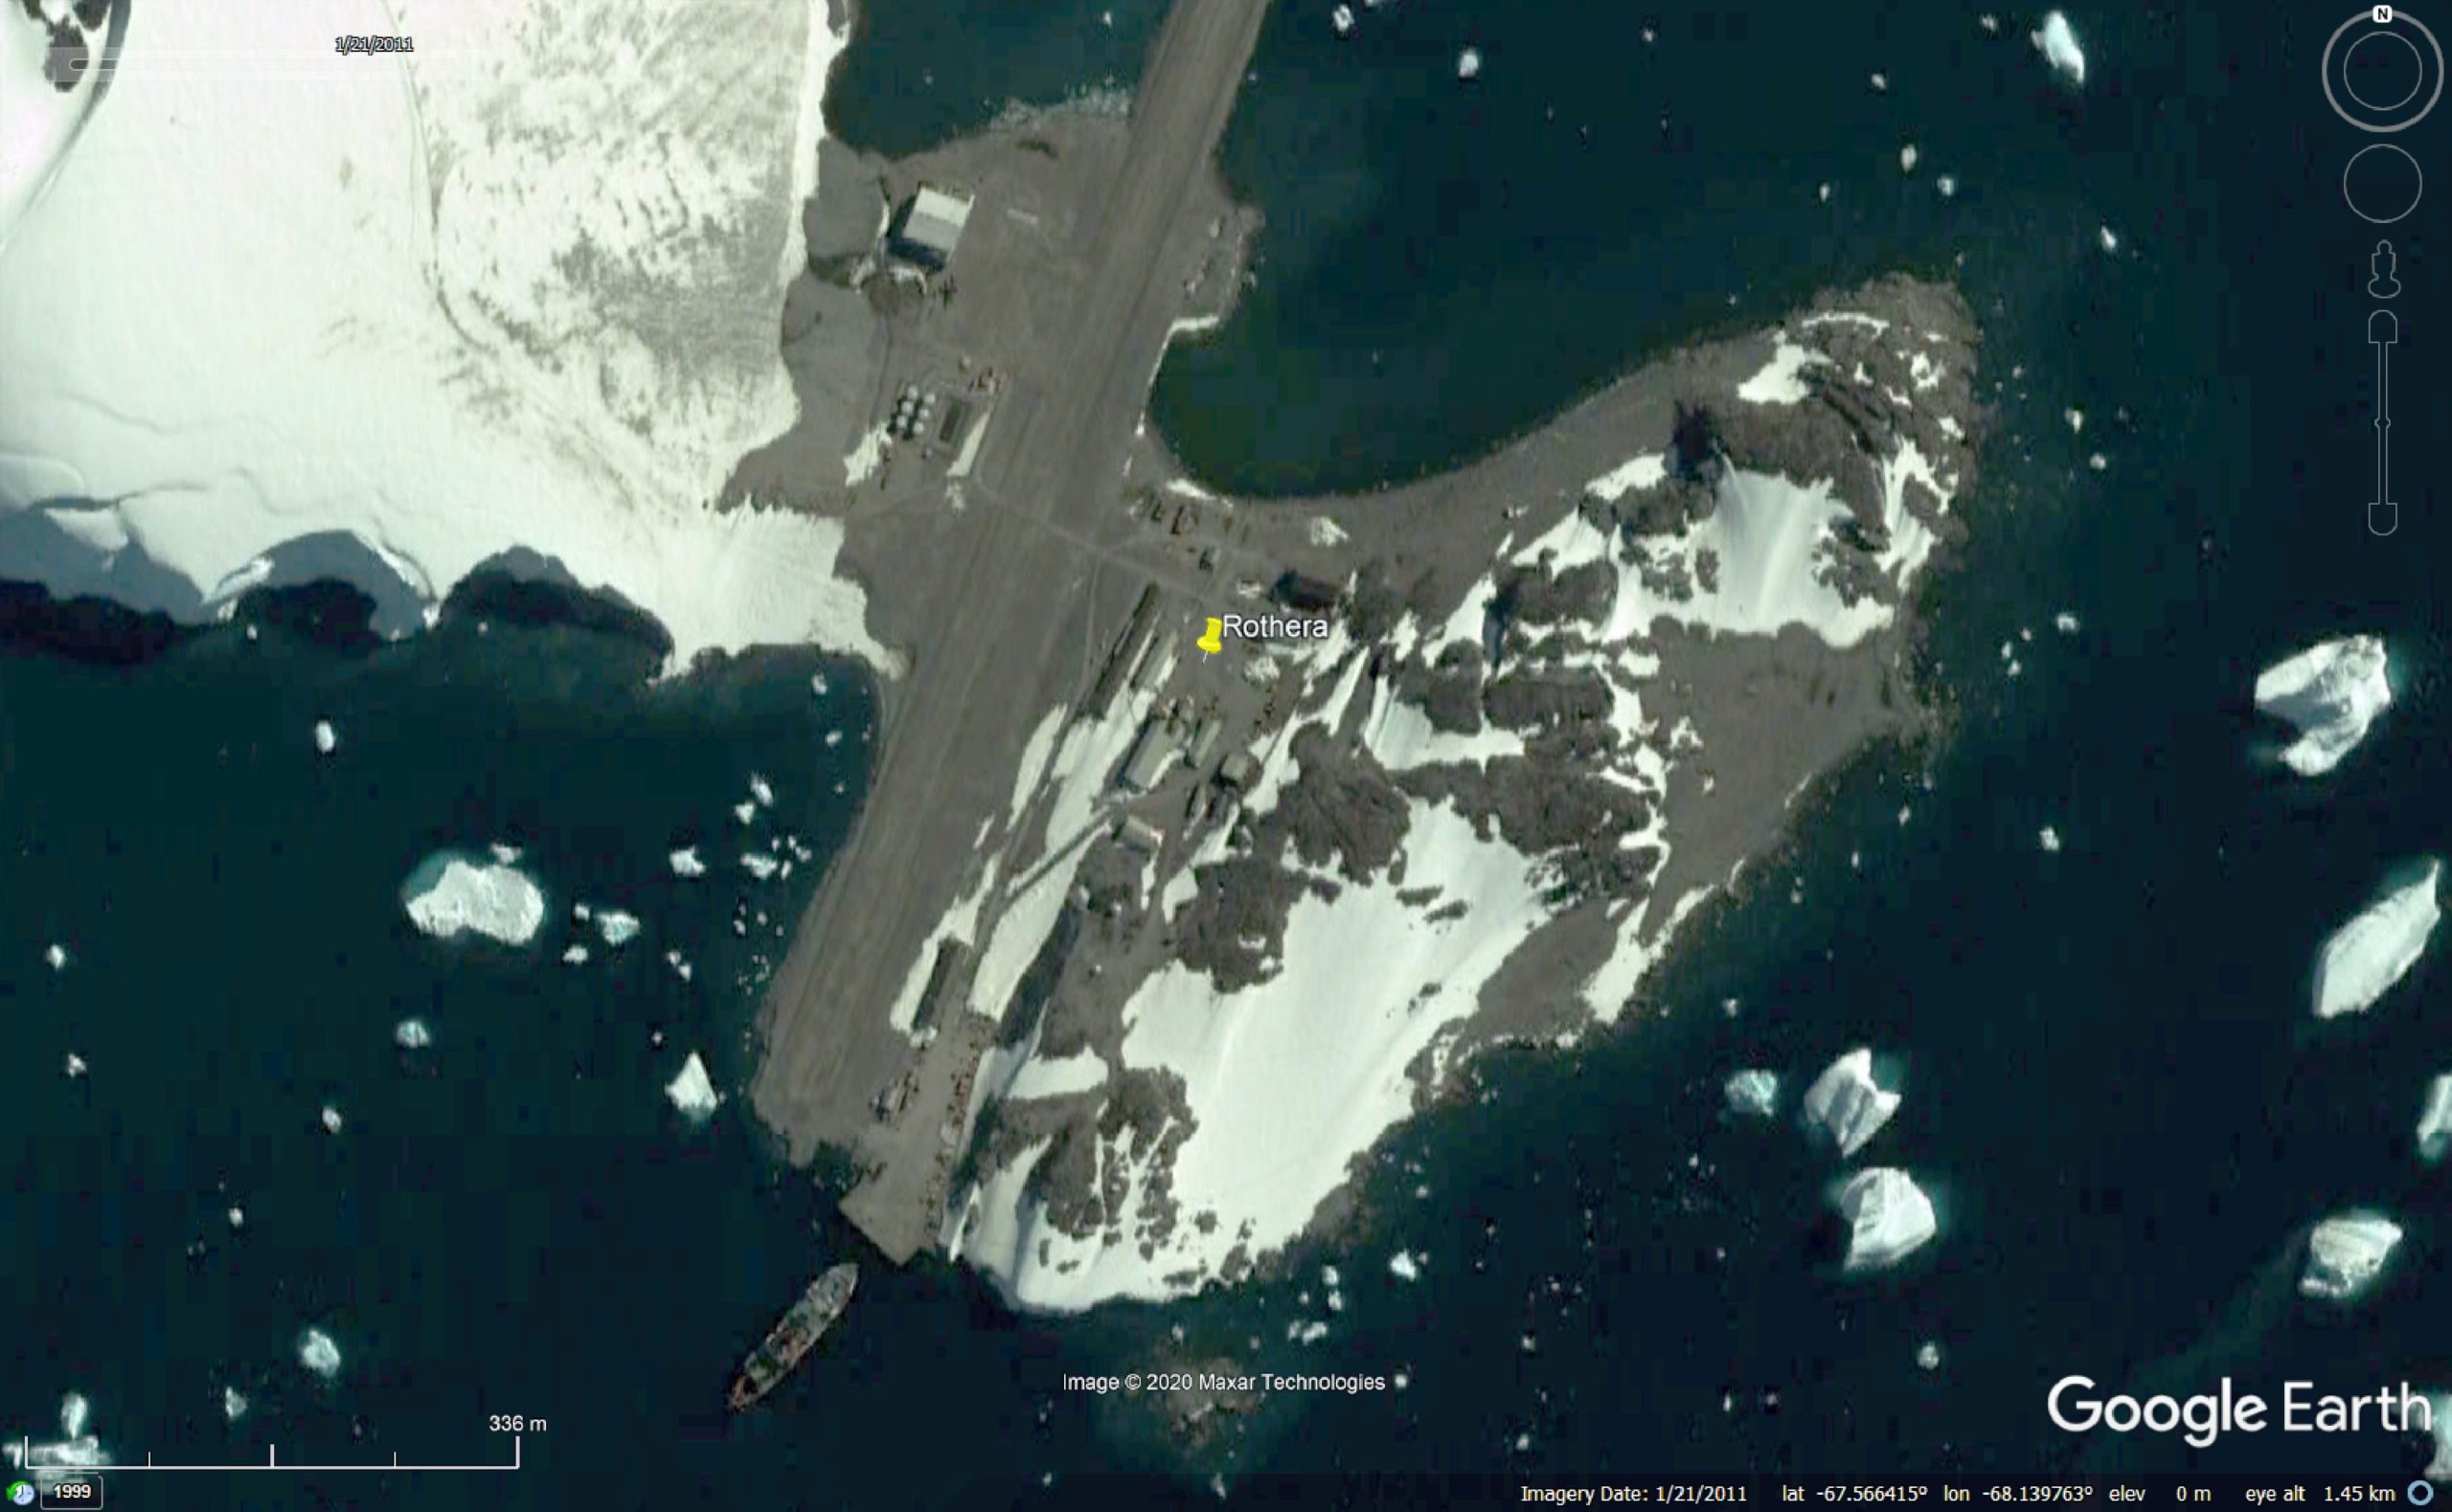 Rothera from space by Google Earth